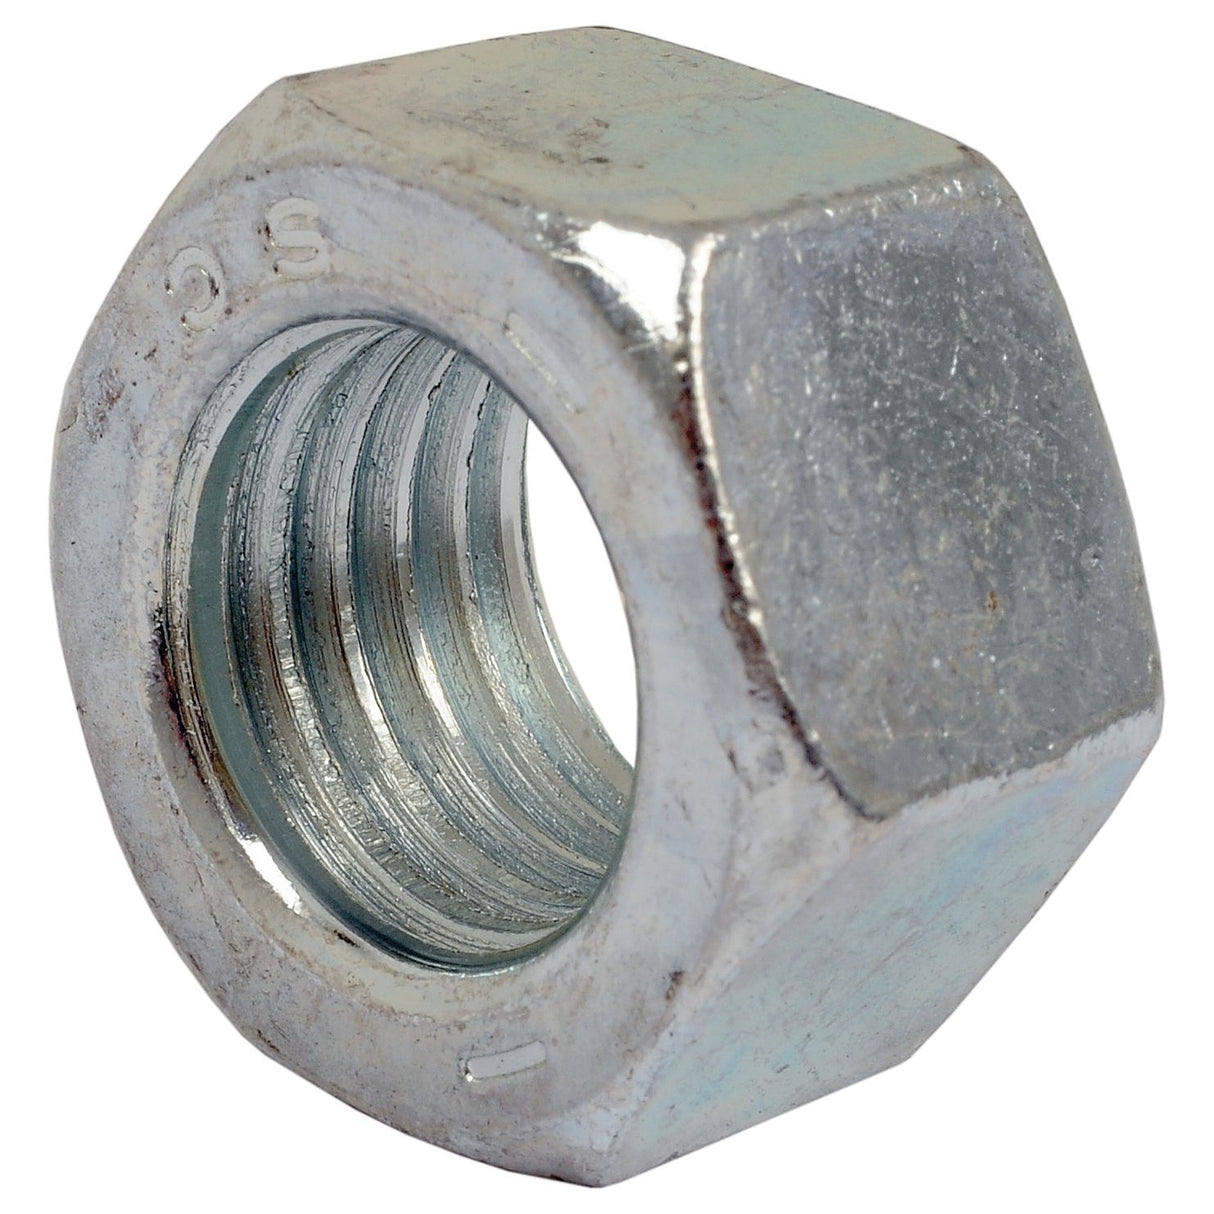 Imperial Hexagon Nut, Size: 7/8" UNC (Din 934) Tensile strength: 8.8 - S.1061 - Farming Parts